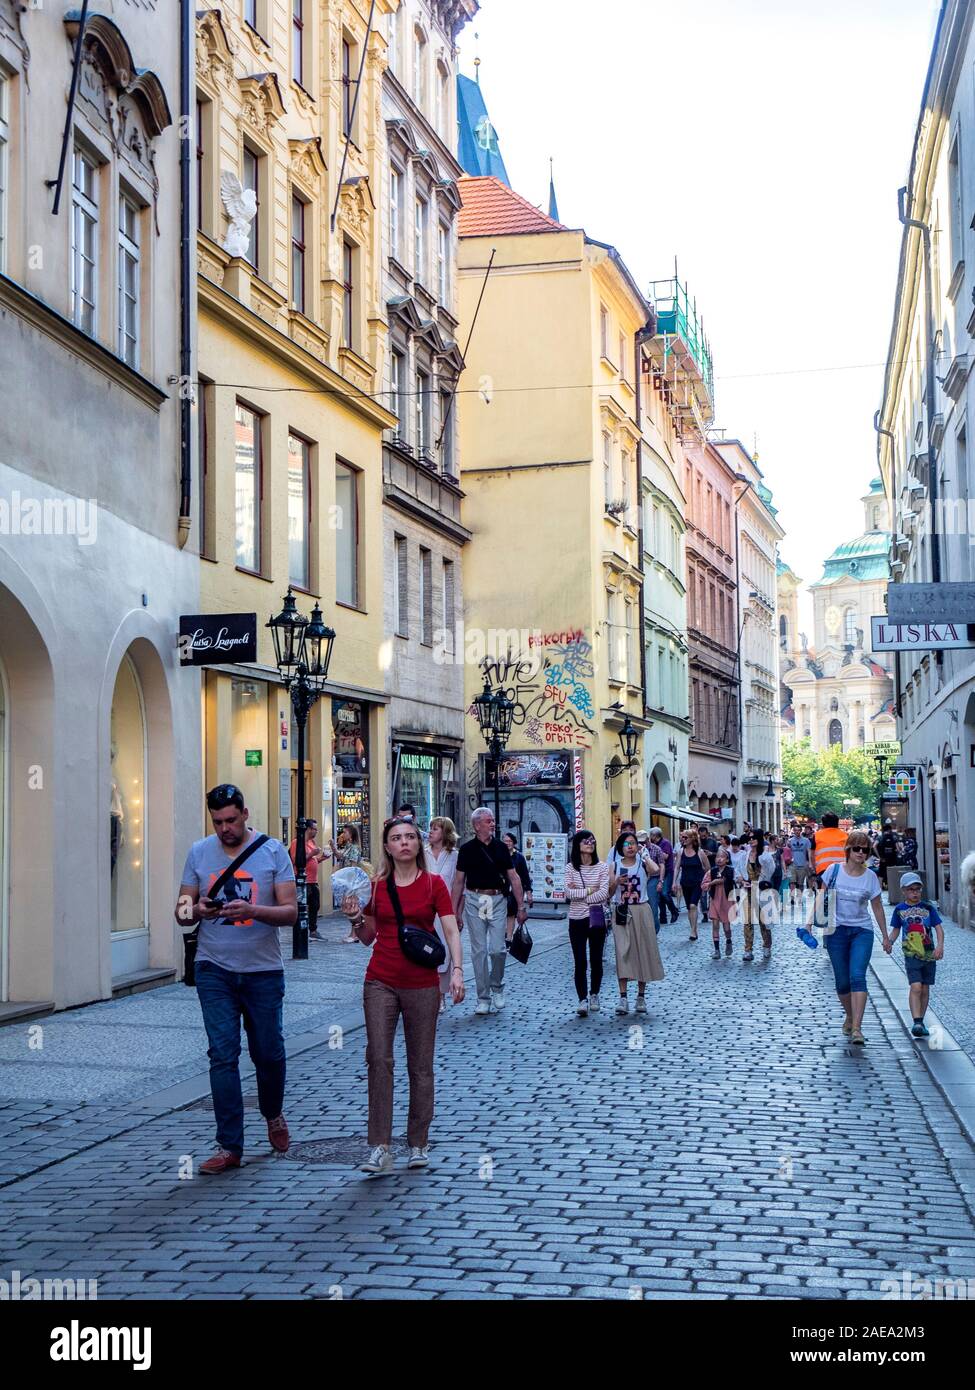 Crowds of tourists walking along cobblestone Železná street lined with touristic shops and cafes Old Town Prague Czech Republic. Stock Photo